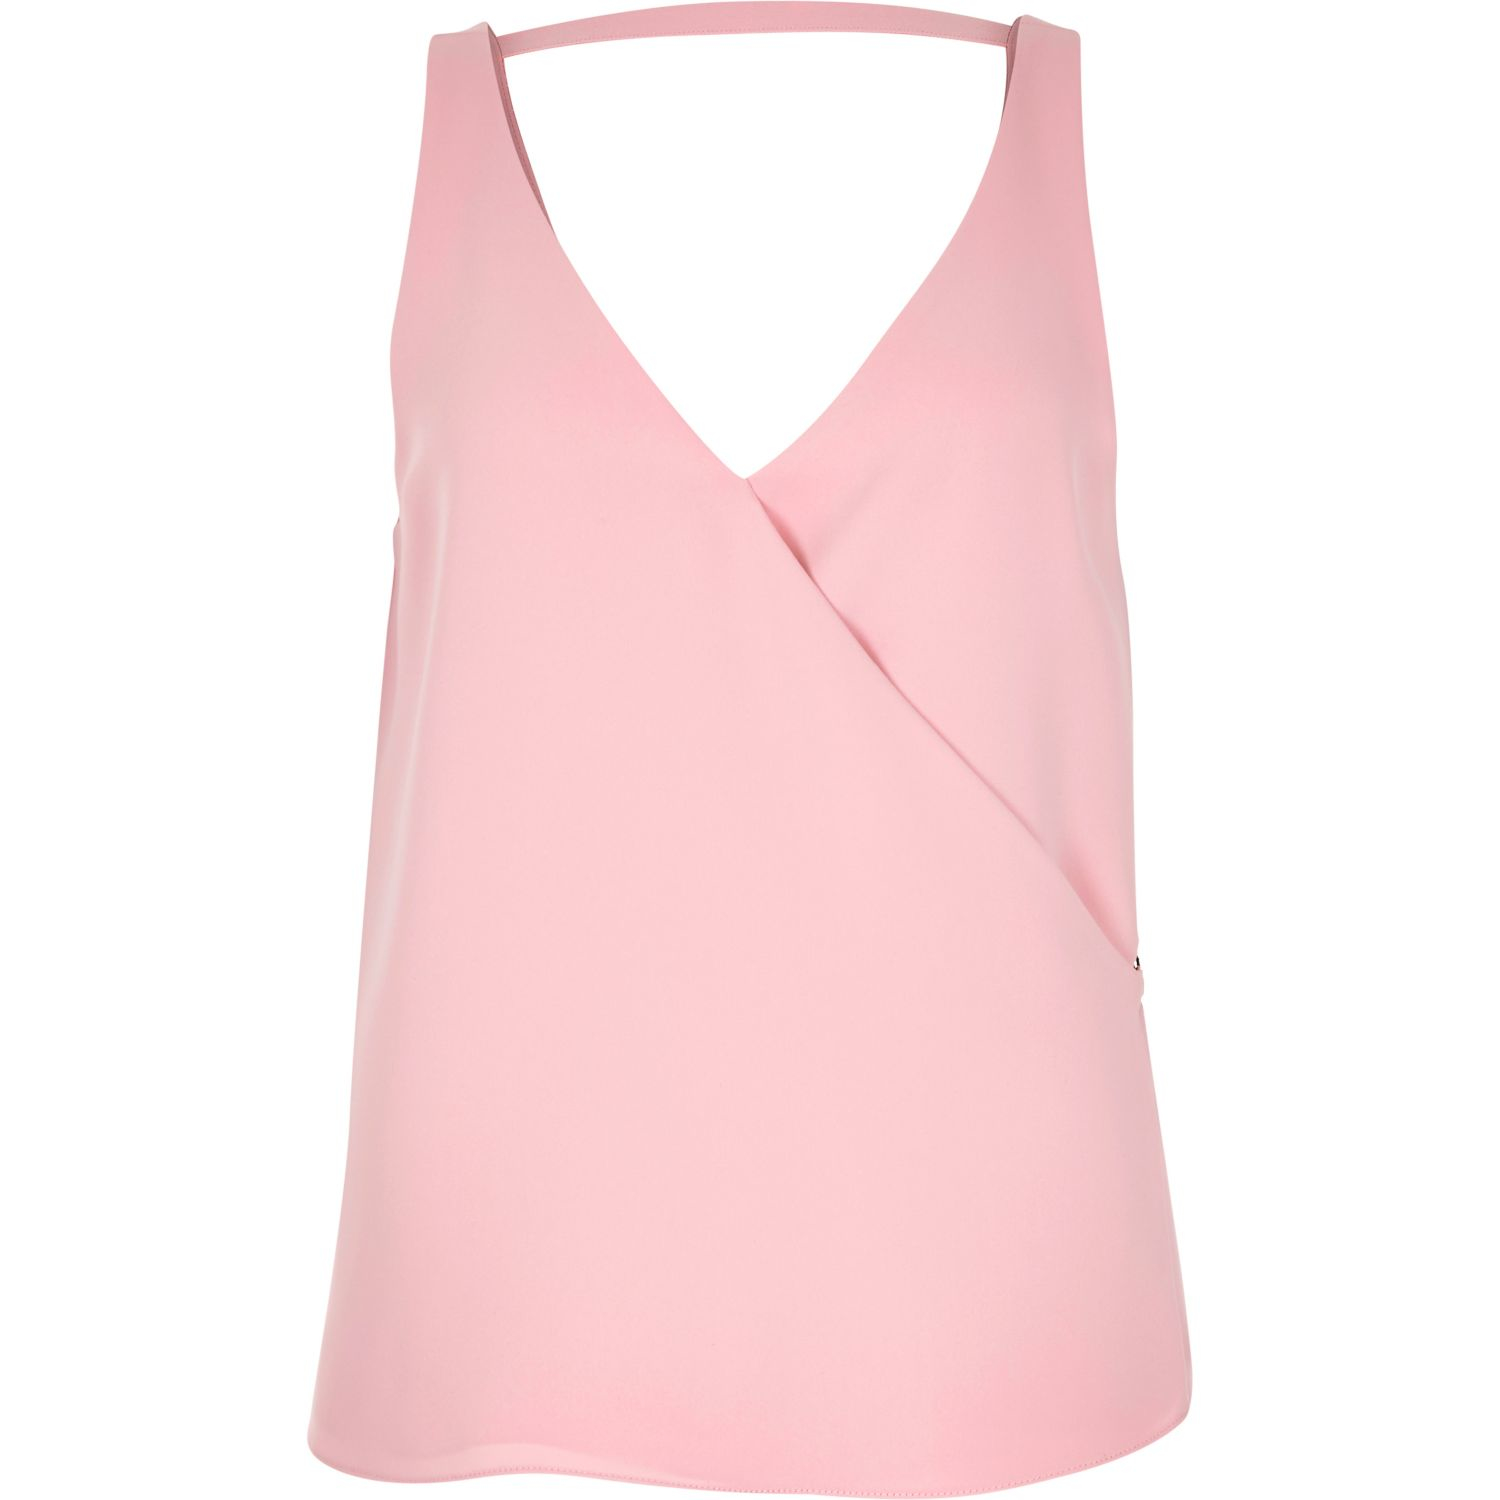 River Island Light Pink V-neck Wrap Sleeveless Top in Pink | Lyst